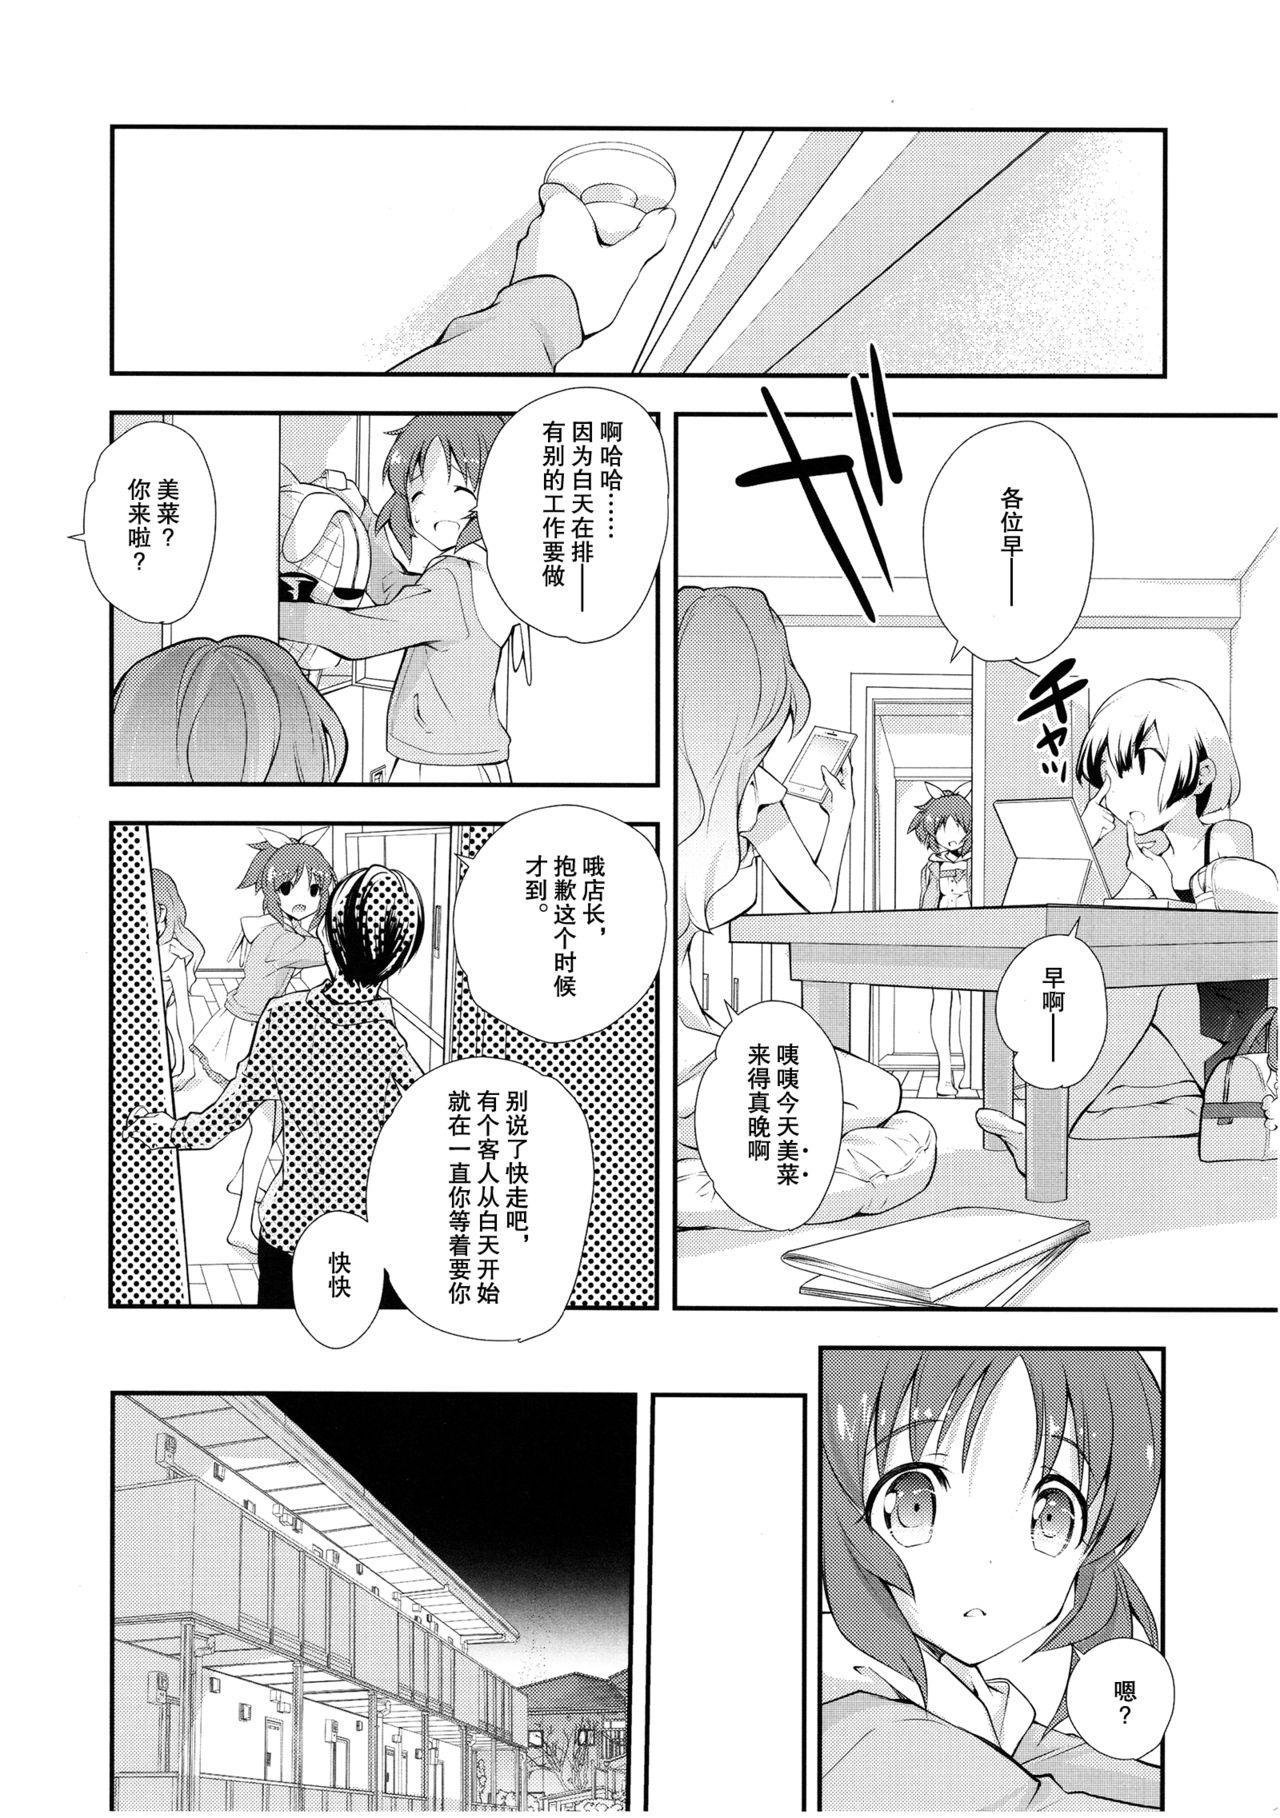 Spying USAMIN NO-LOAD - The idolmaster Bisex - Page 7